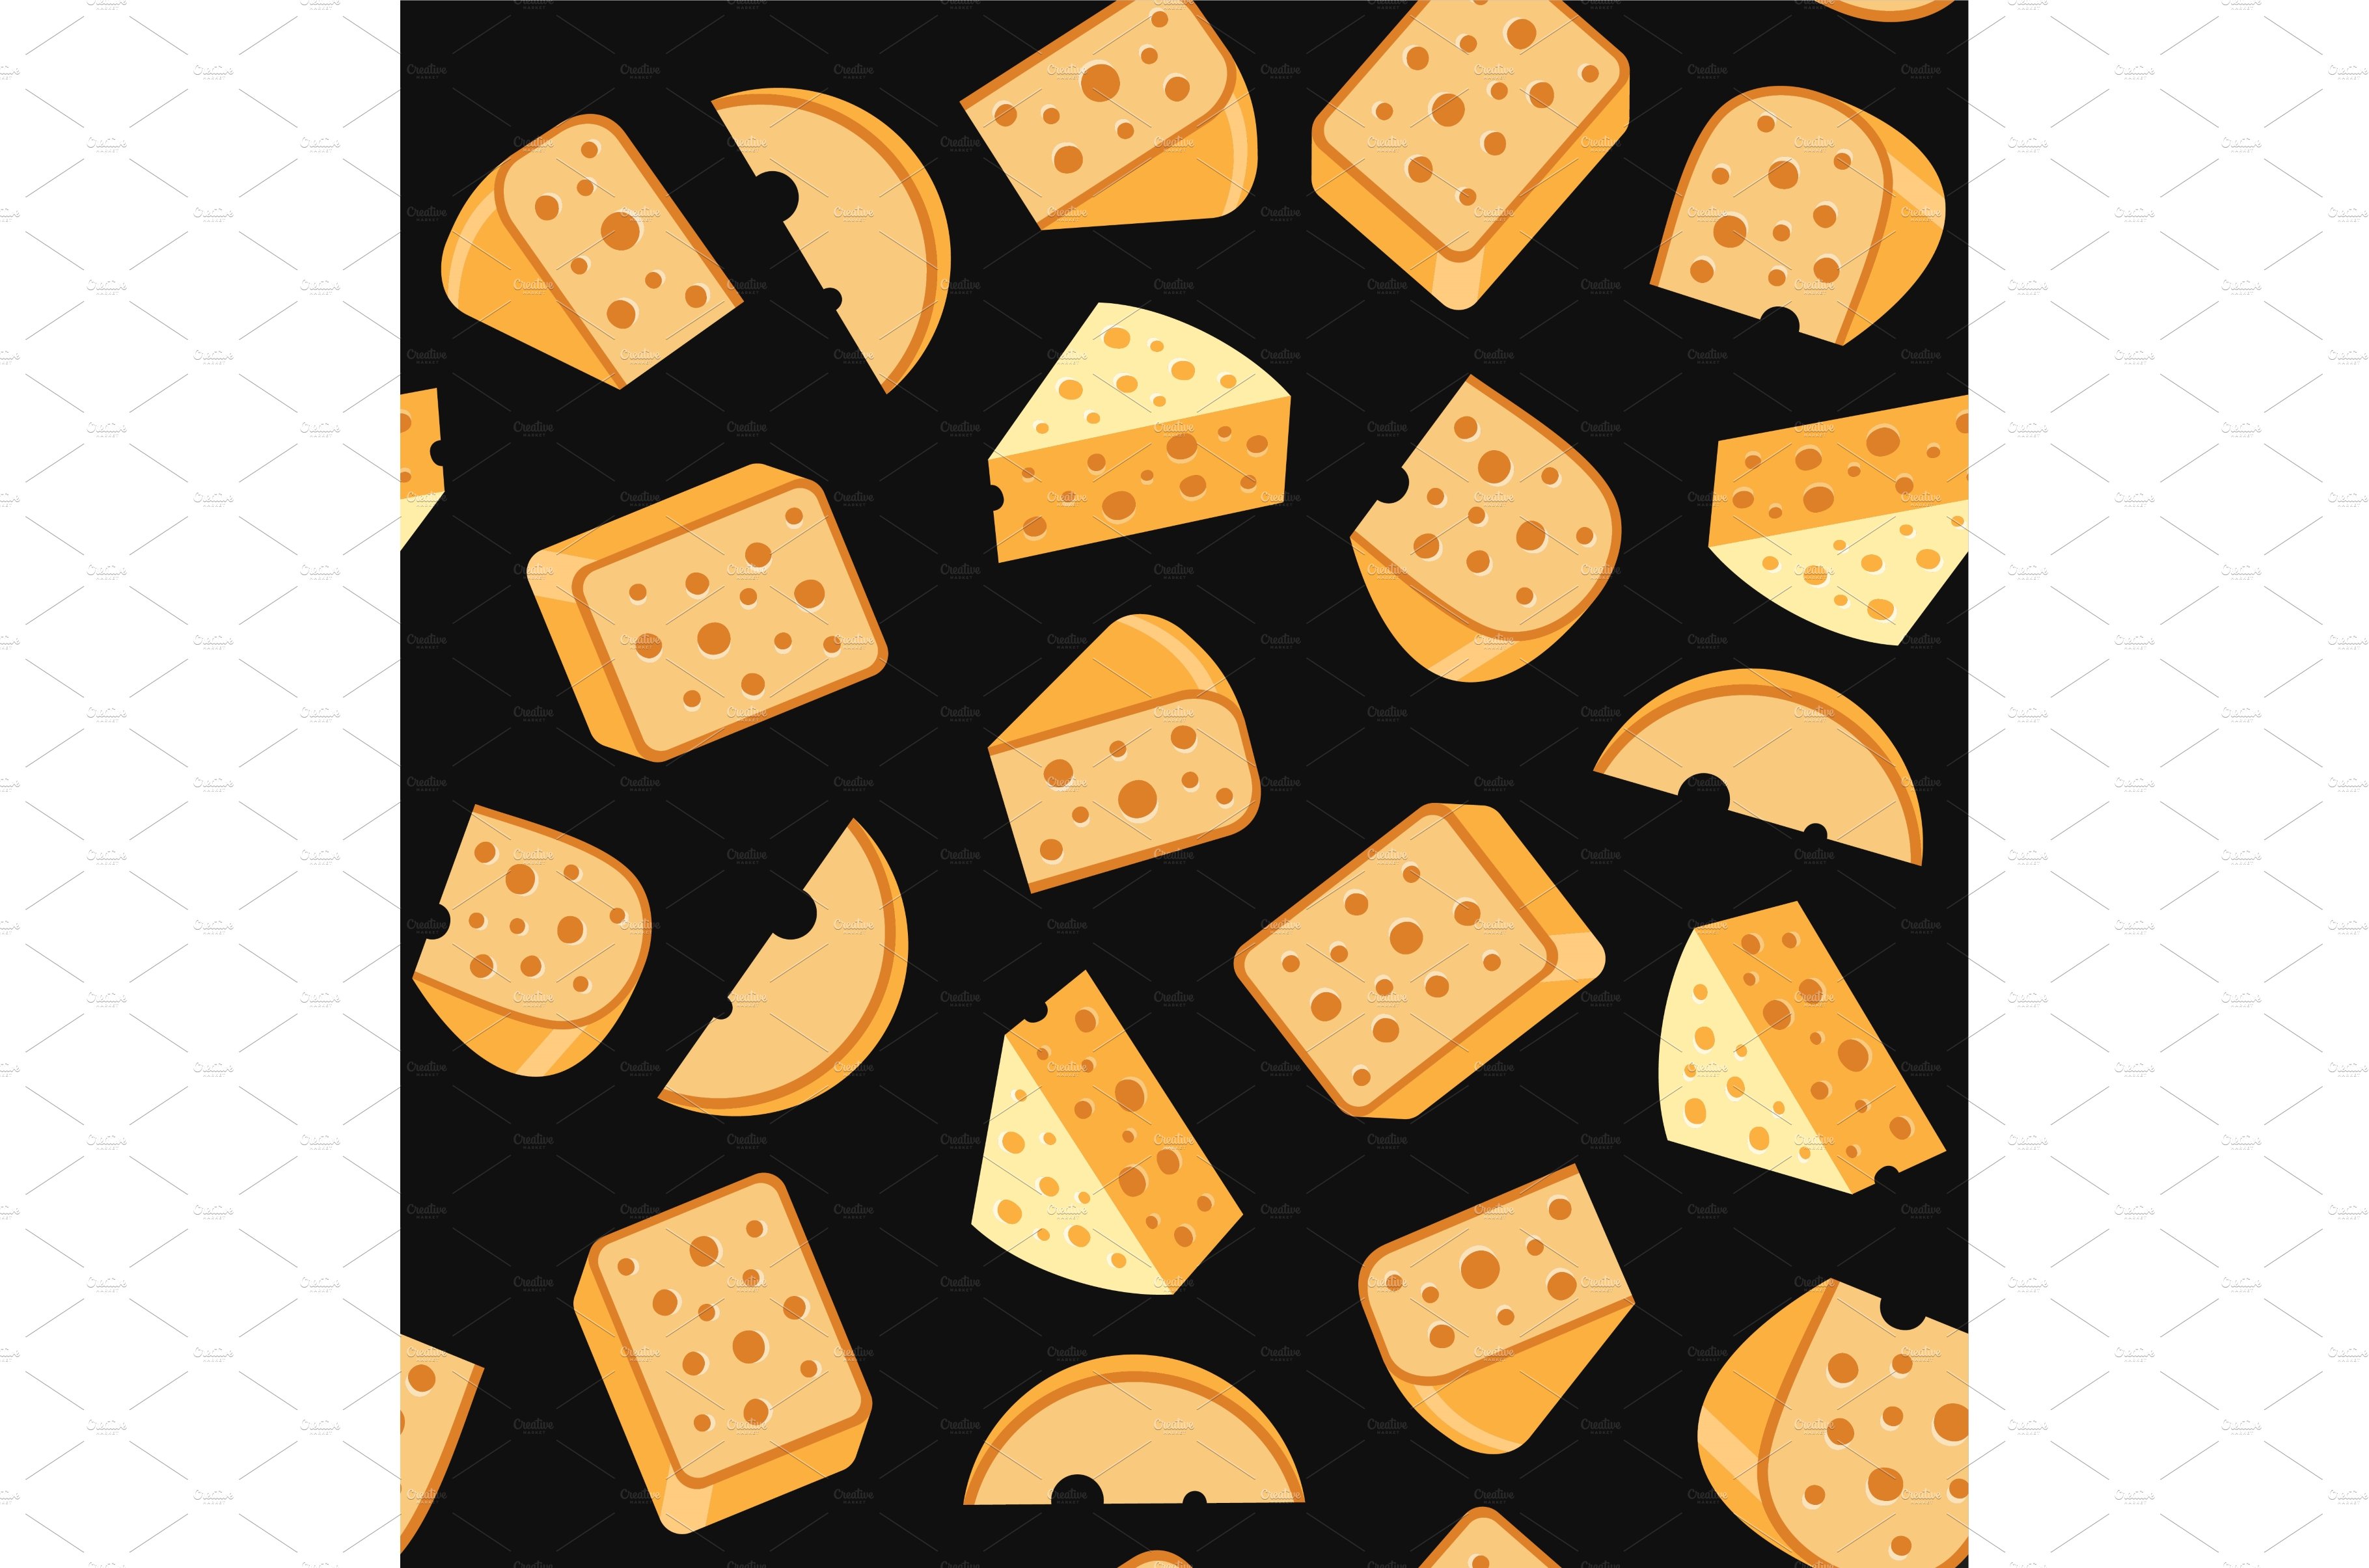 Cheese Seamless Pattern on Black cover image.